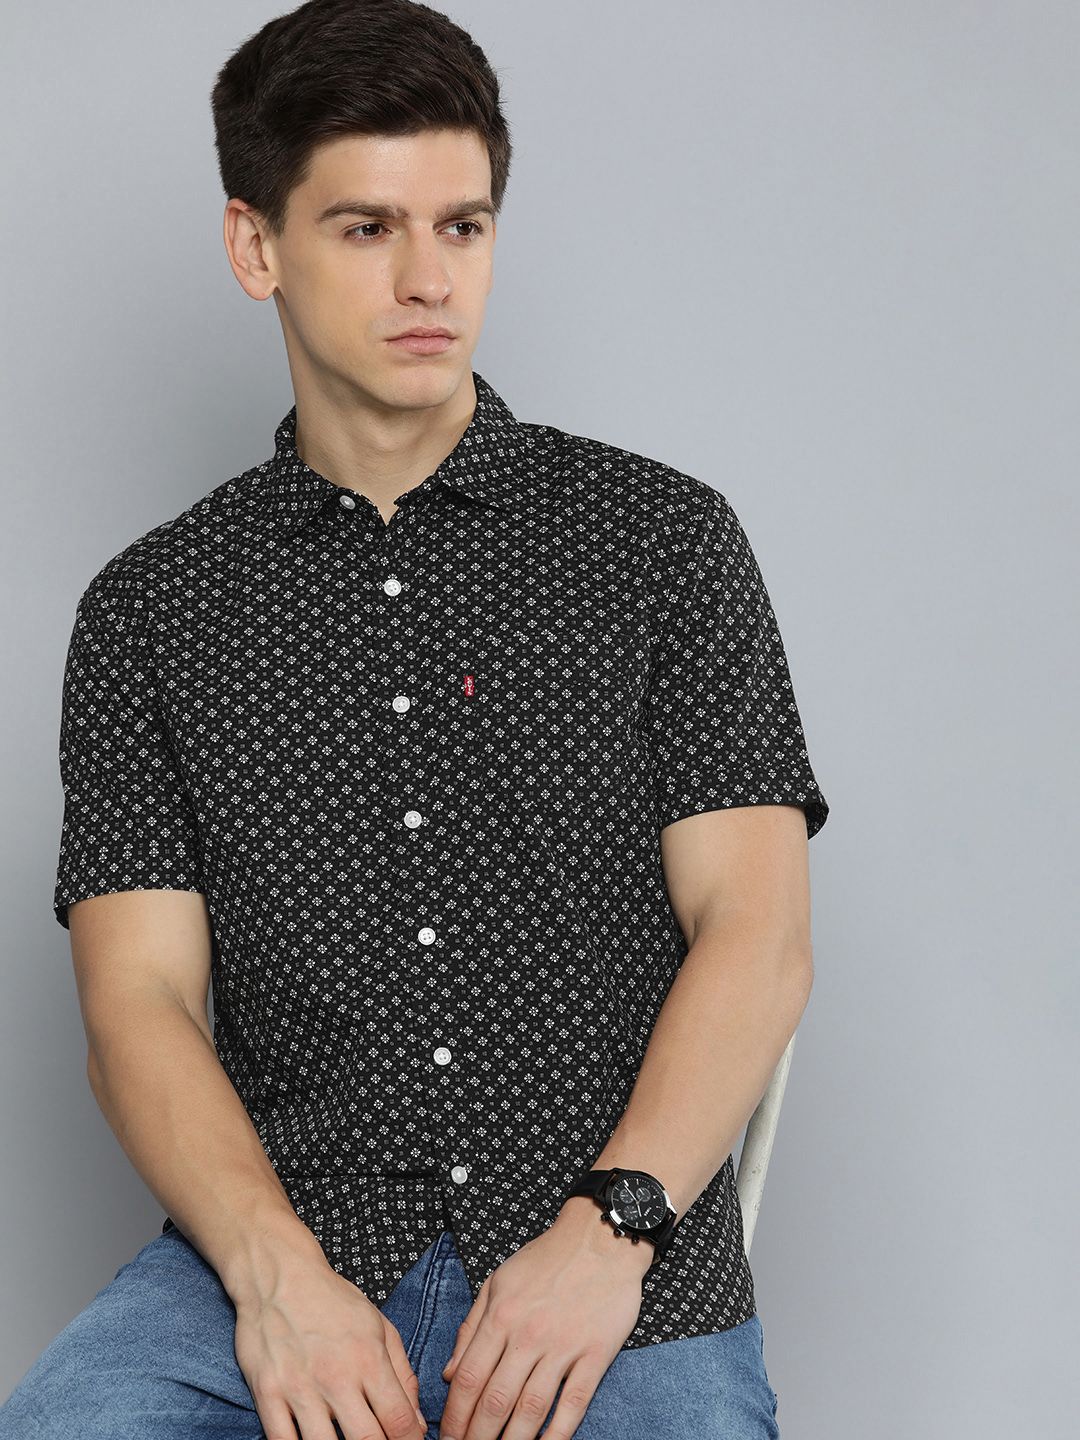 Levis Pure Cotton Slim Fit Full Sleeves Floral Printed Casual Shirt